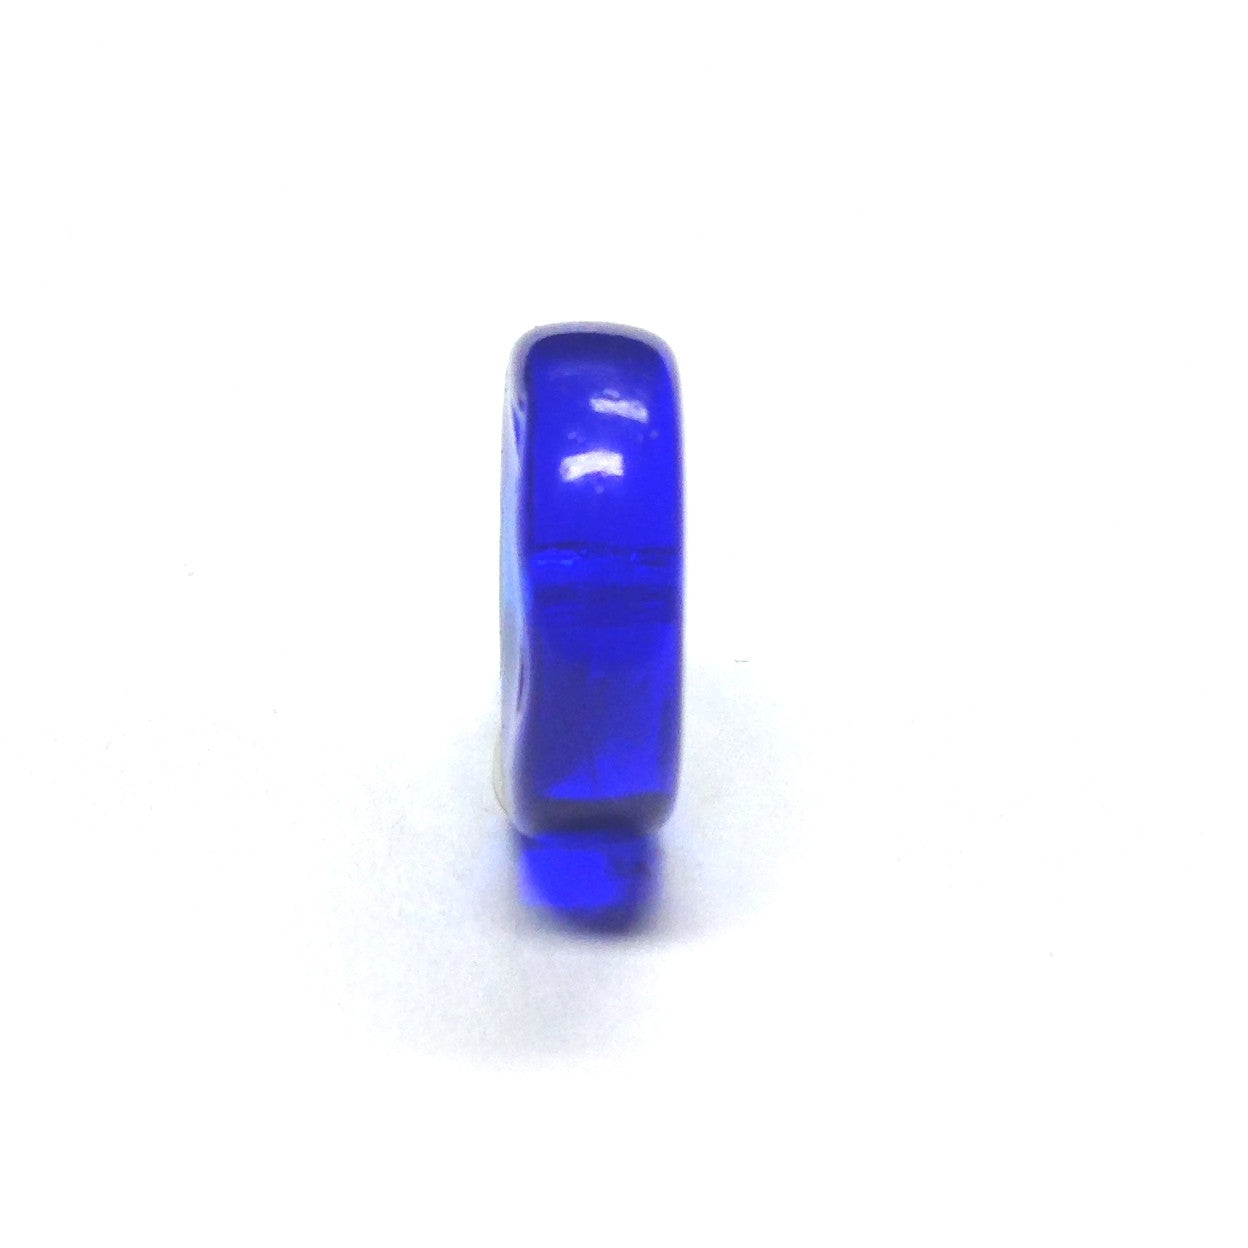 6MM Sapphire Blue Glass Rondel Bead (144 pieces)